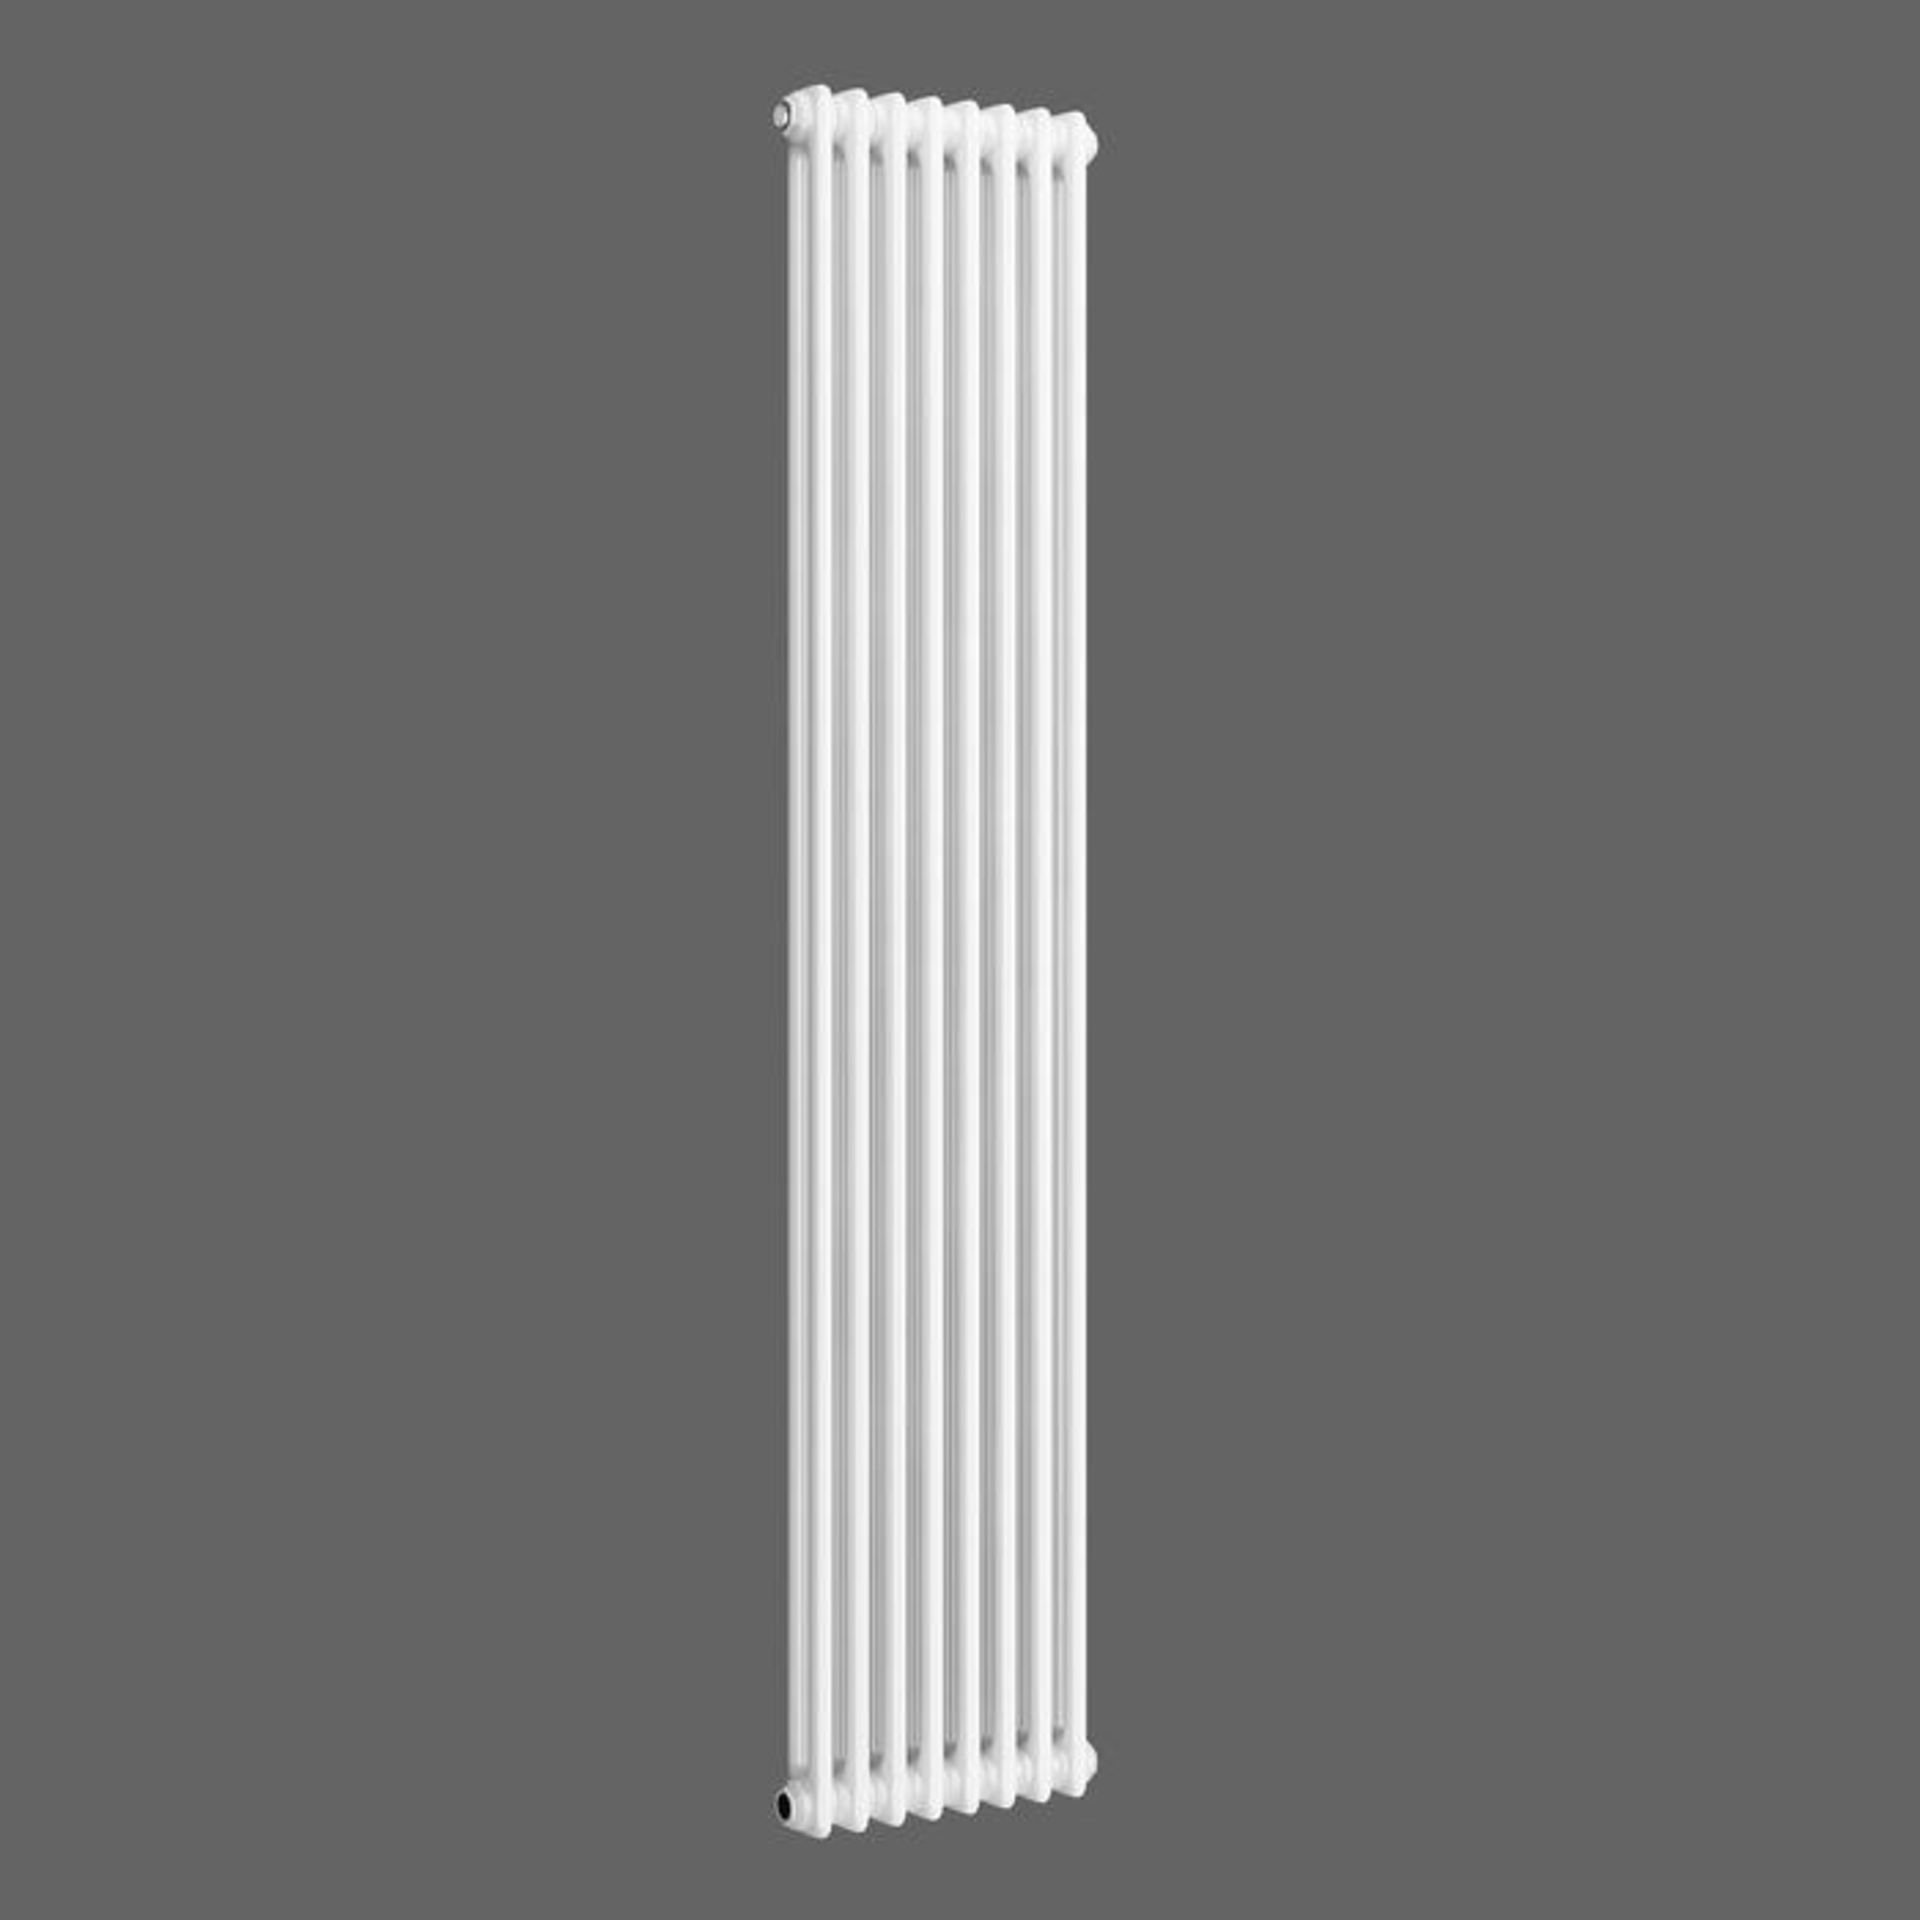 (VD29) 2000x398mm White Double Panel Vertical Colosseum Traditional Radiator. RRP £428.99. Ma... - Image 4 of 4